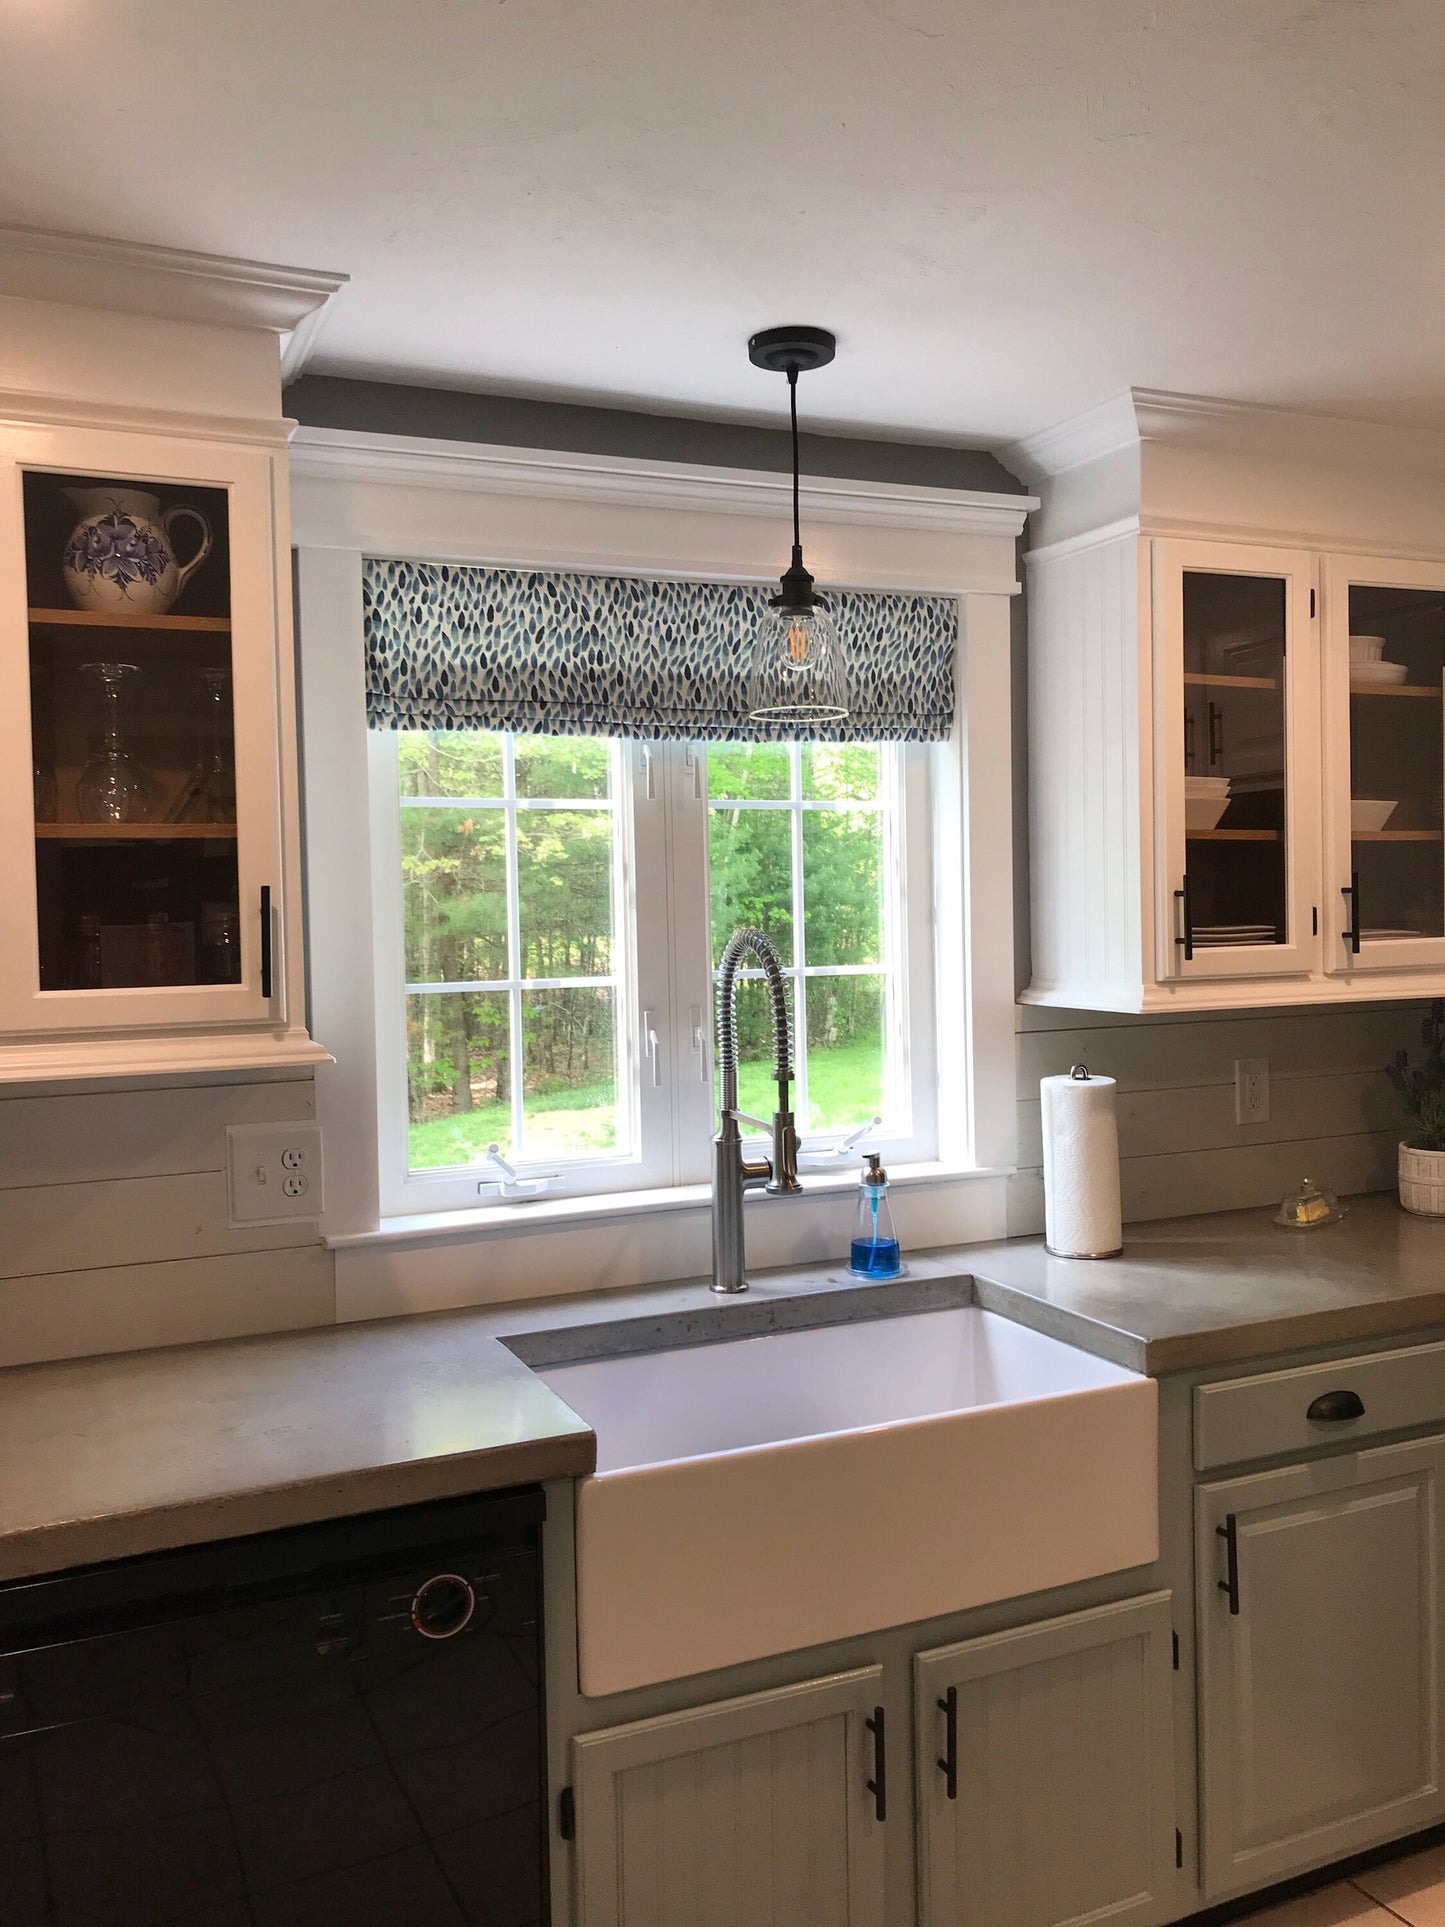 Faux Roman Shades and Valances in Lotus Blue or Grey Print, Fully Lined, Custom Made Modern Kitchen Valance, Blue, Aqua, Gray, White